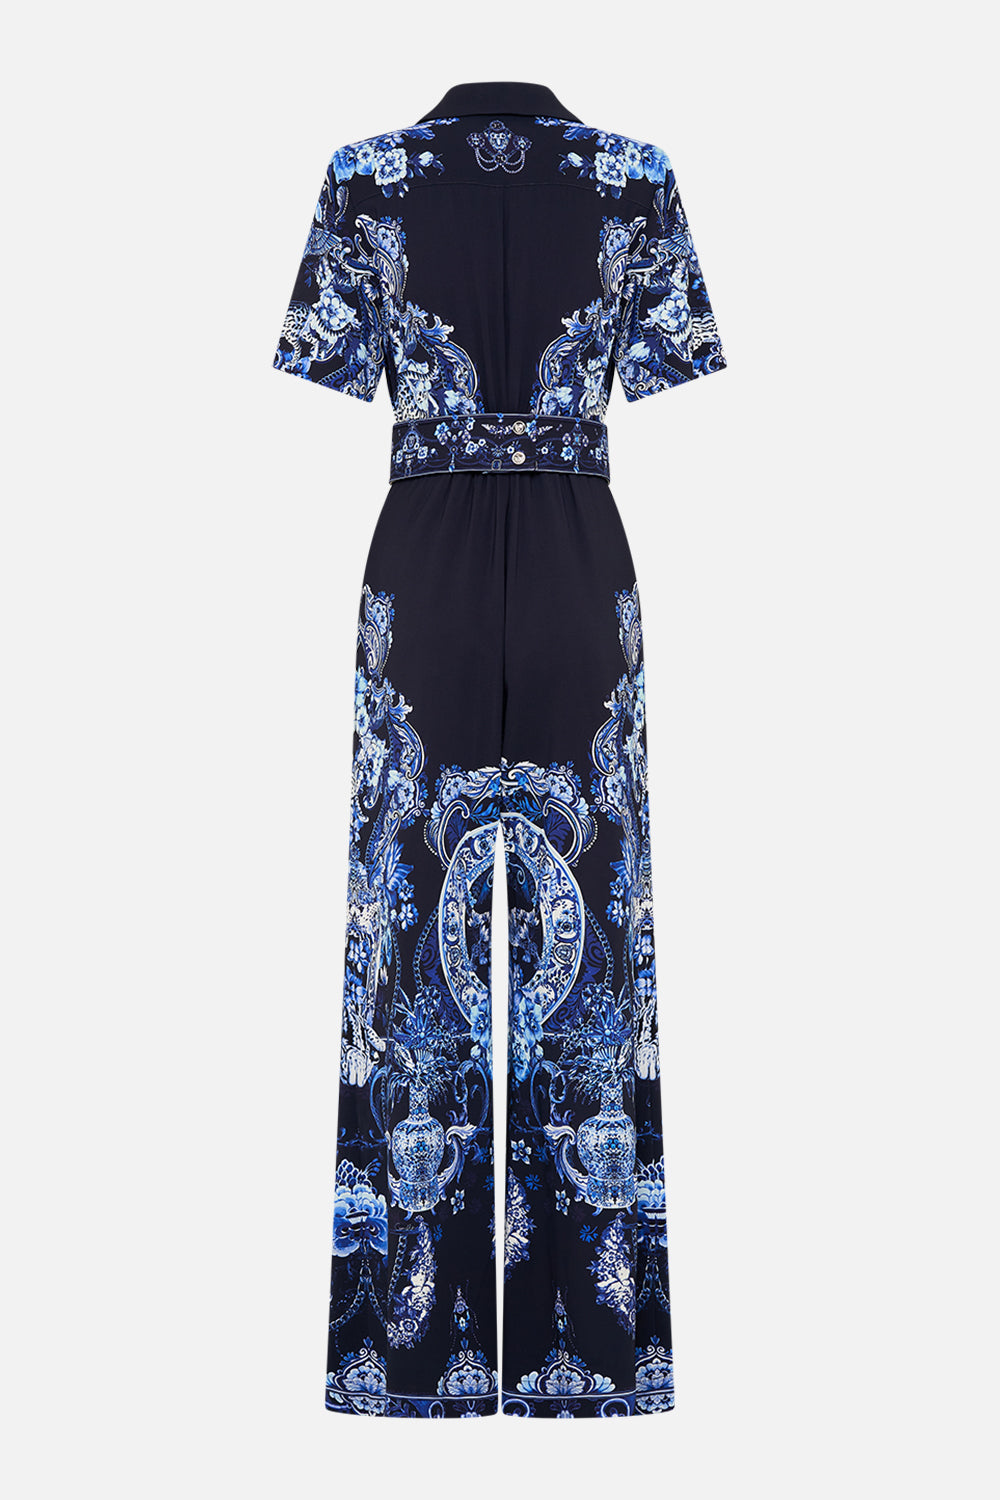 Back view CAMILLA jumpsuit in Delft Dynasty print 